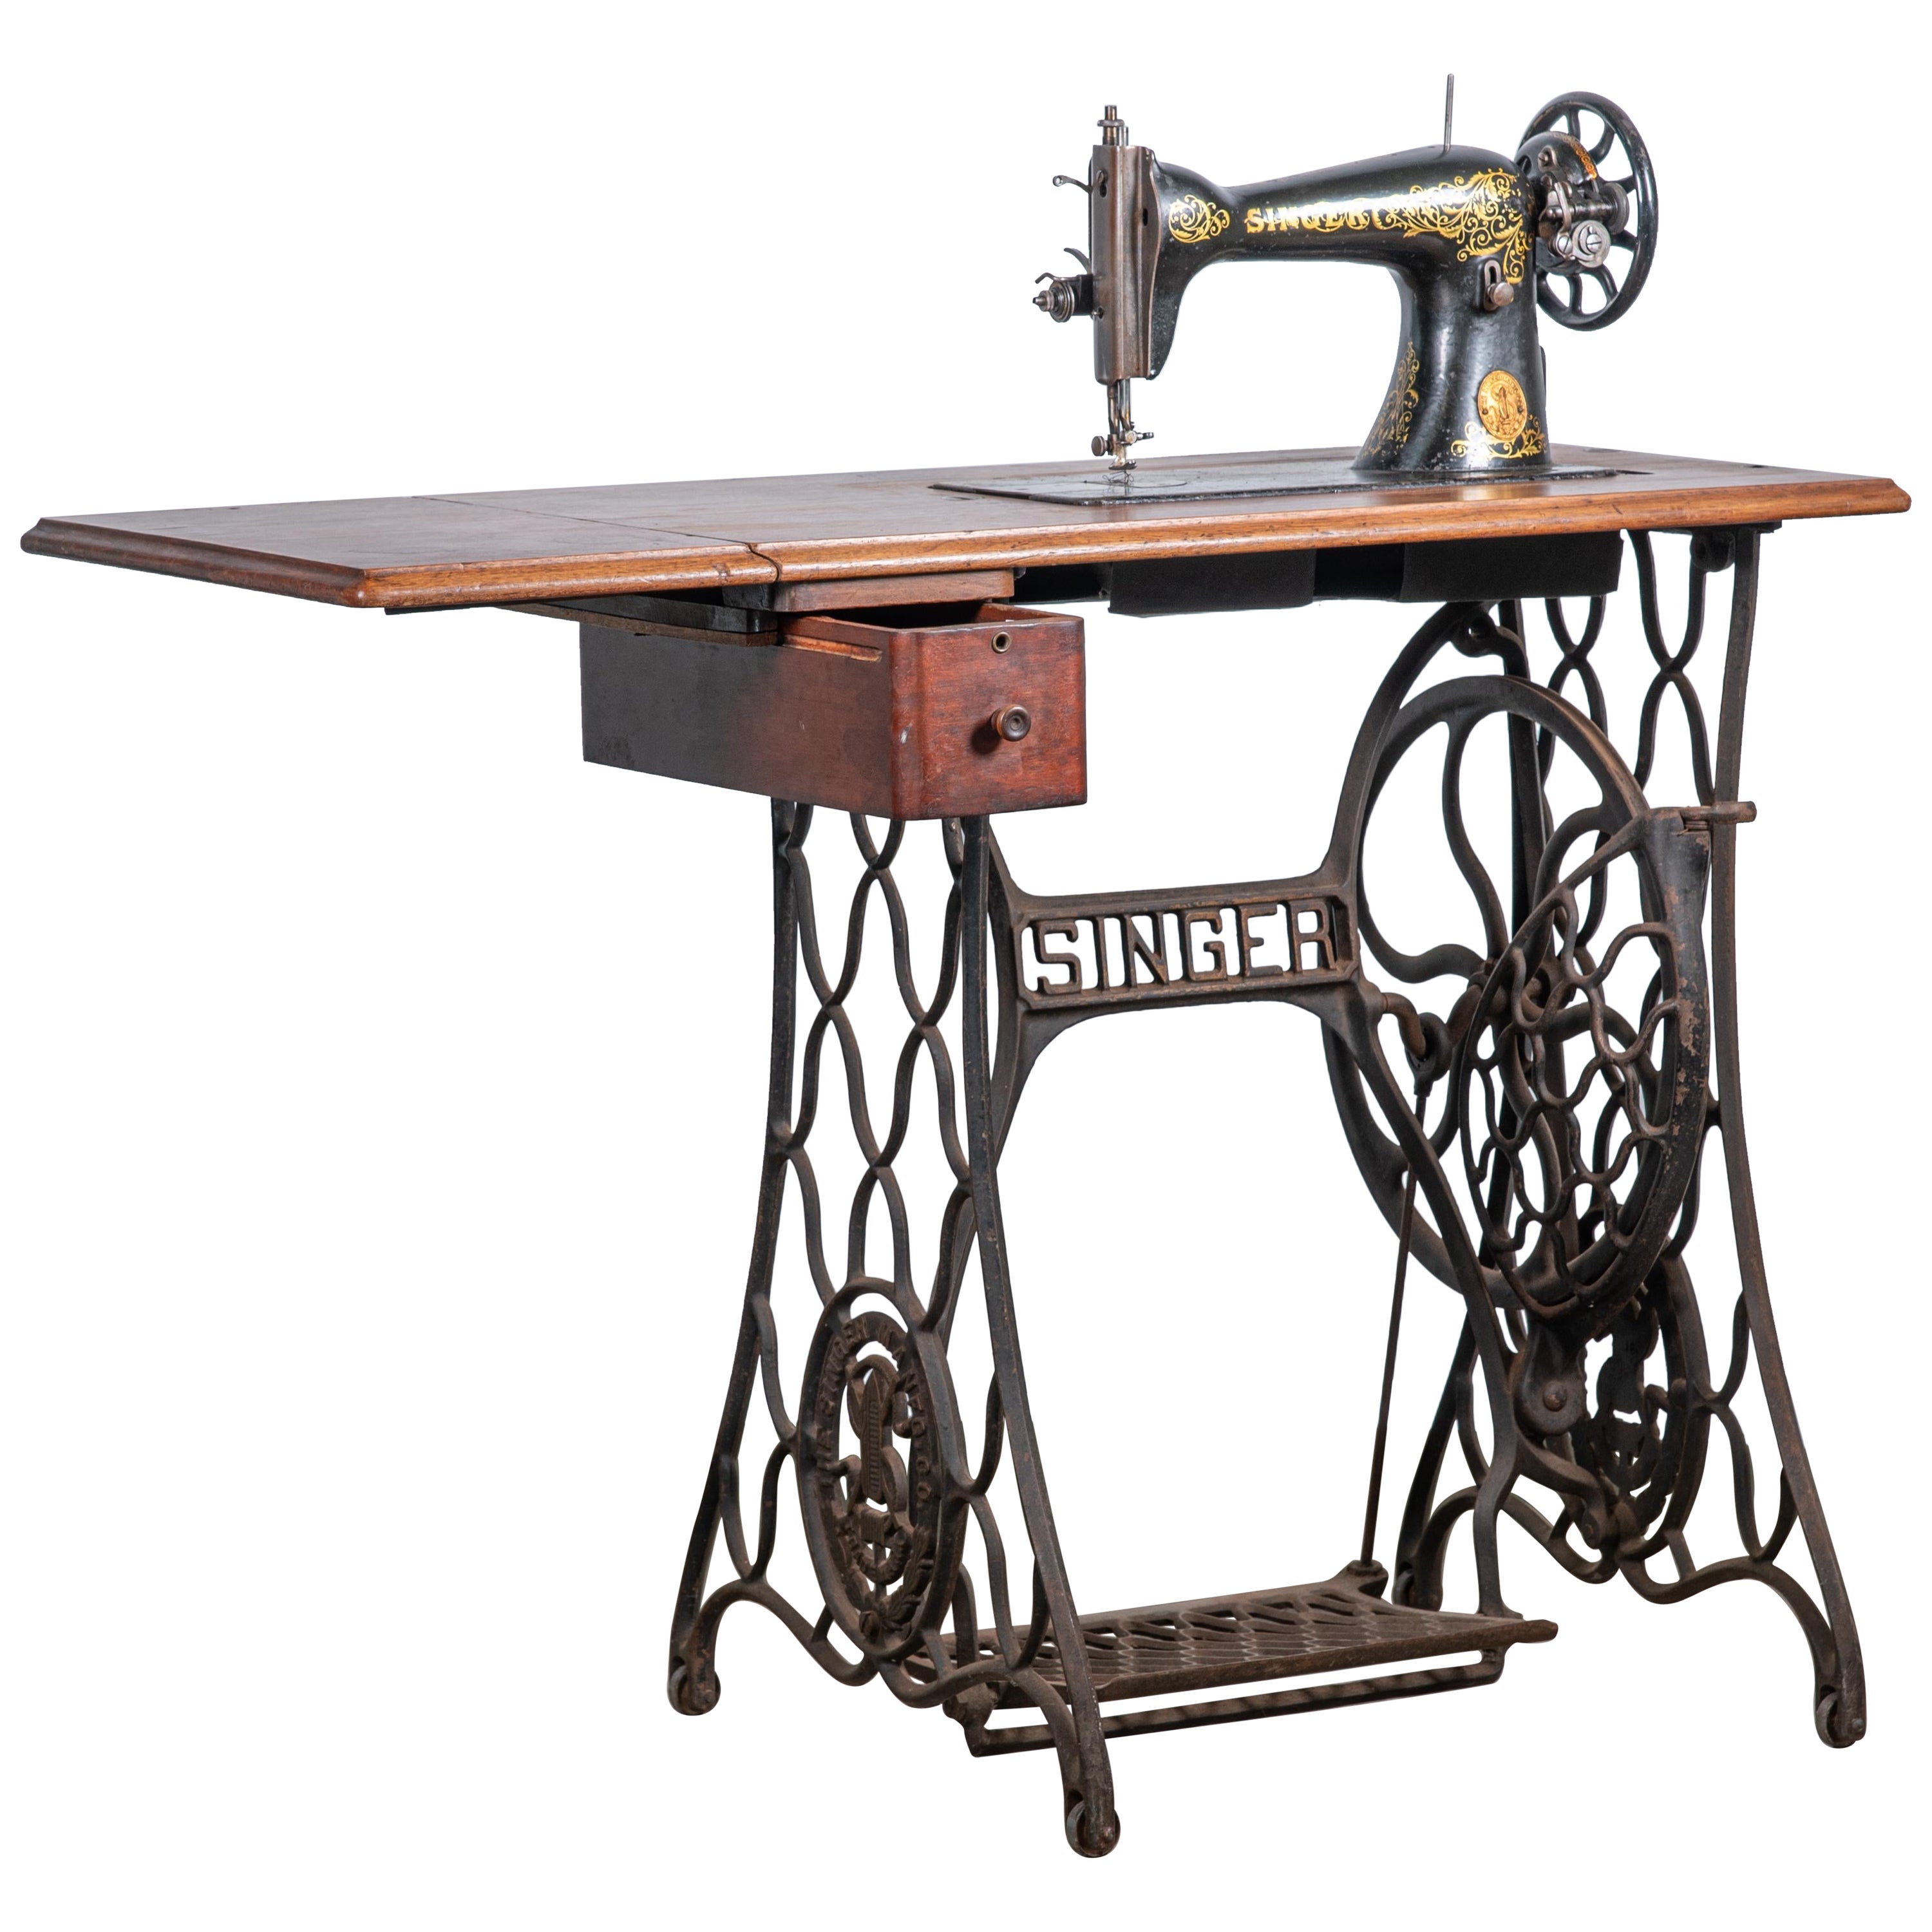 19th Century Singer Sewing Machine For Sale